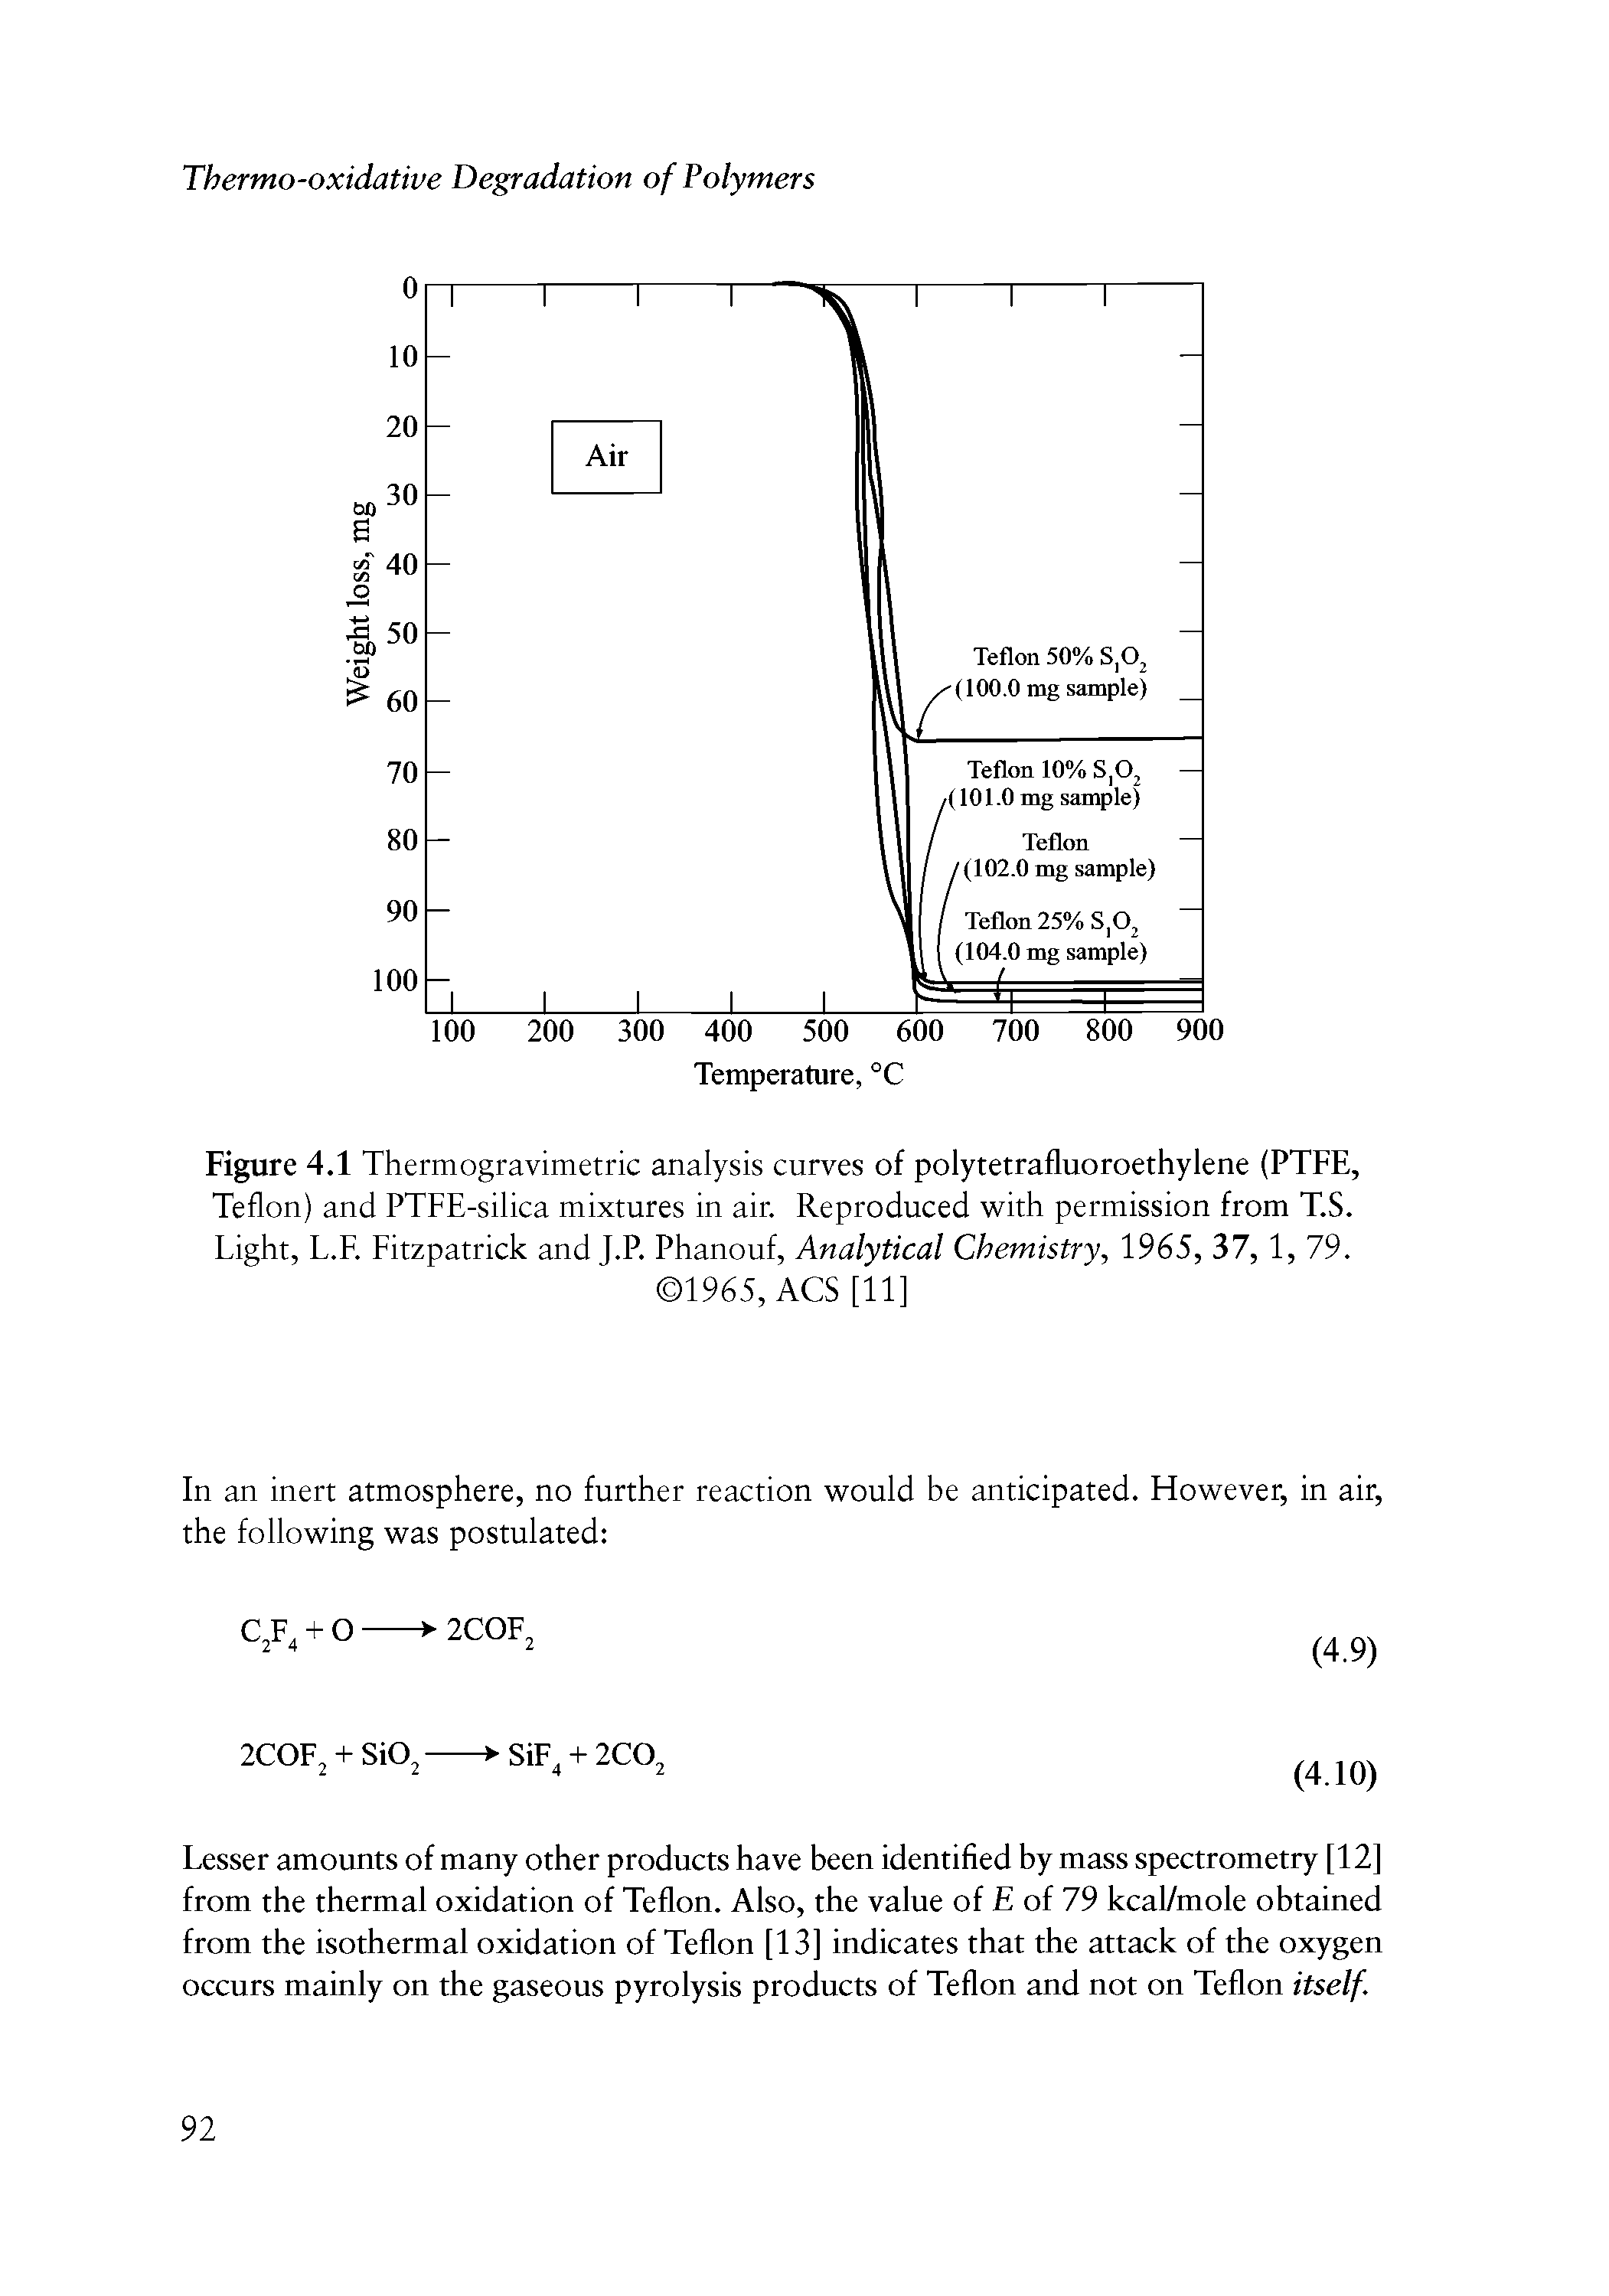 Figure 4.1 Thermogravimetric analysis curves of polytetrafluoroethylene (PTFE, Teflon) and PTFE-silica mixtures in air. Reproduced with permission from T.S. Light, L.R Fitzpatrick and J.P. Phanouf, Analytical Chemistry, 1965, 37, 1, 79.